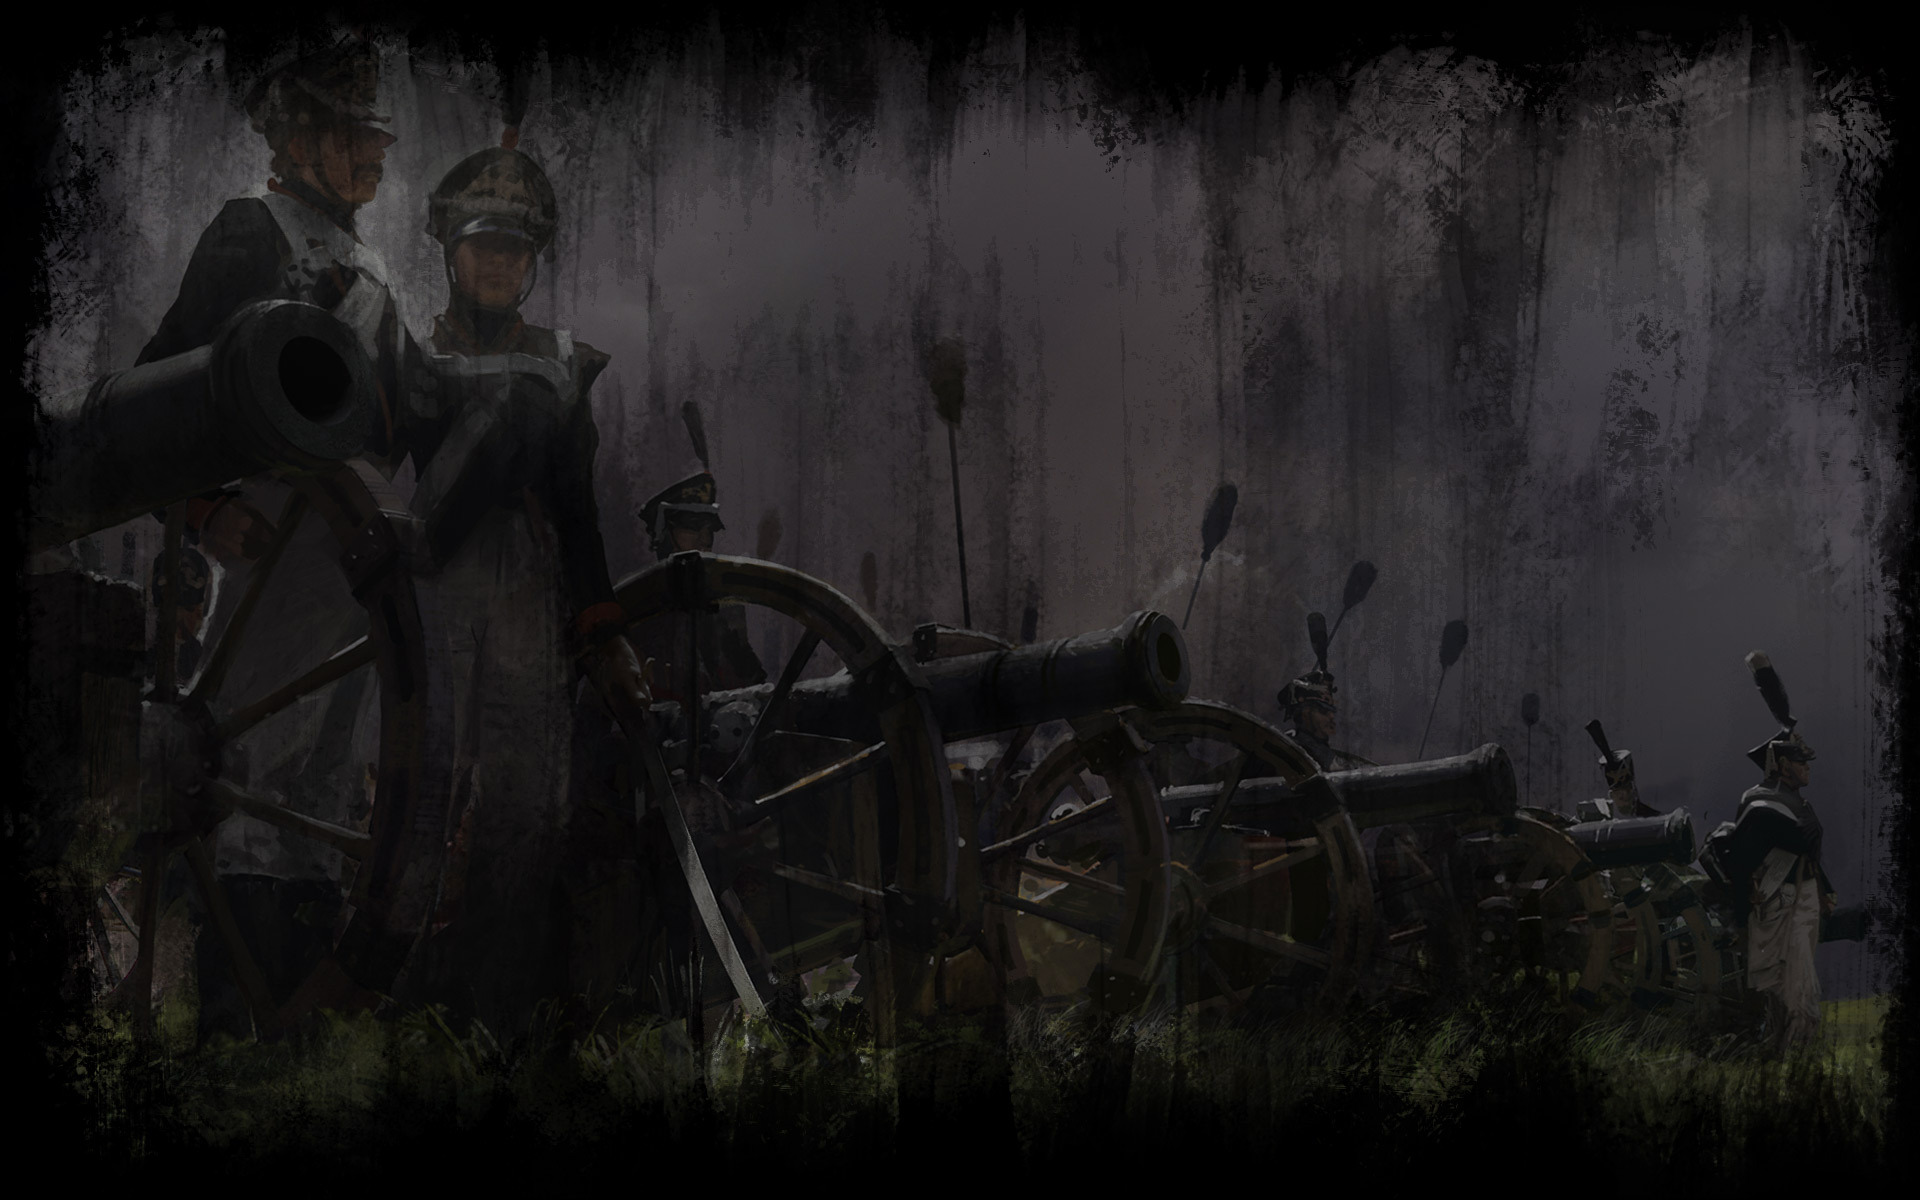 Wallpaper From Age Of Empires Iii Gamepressure